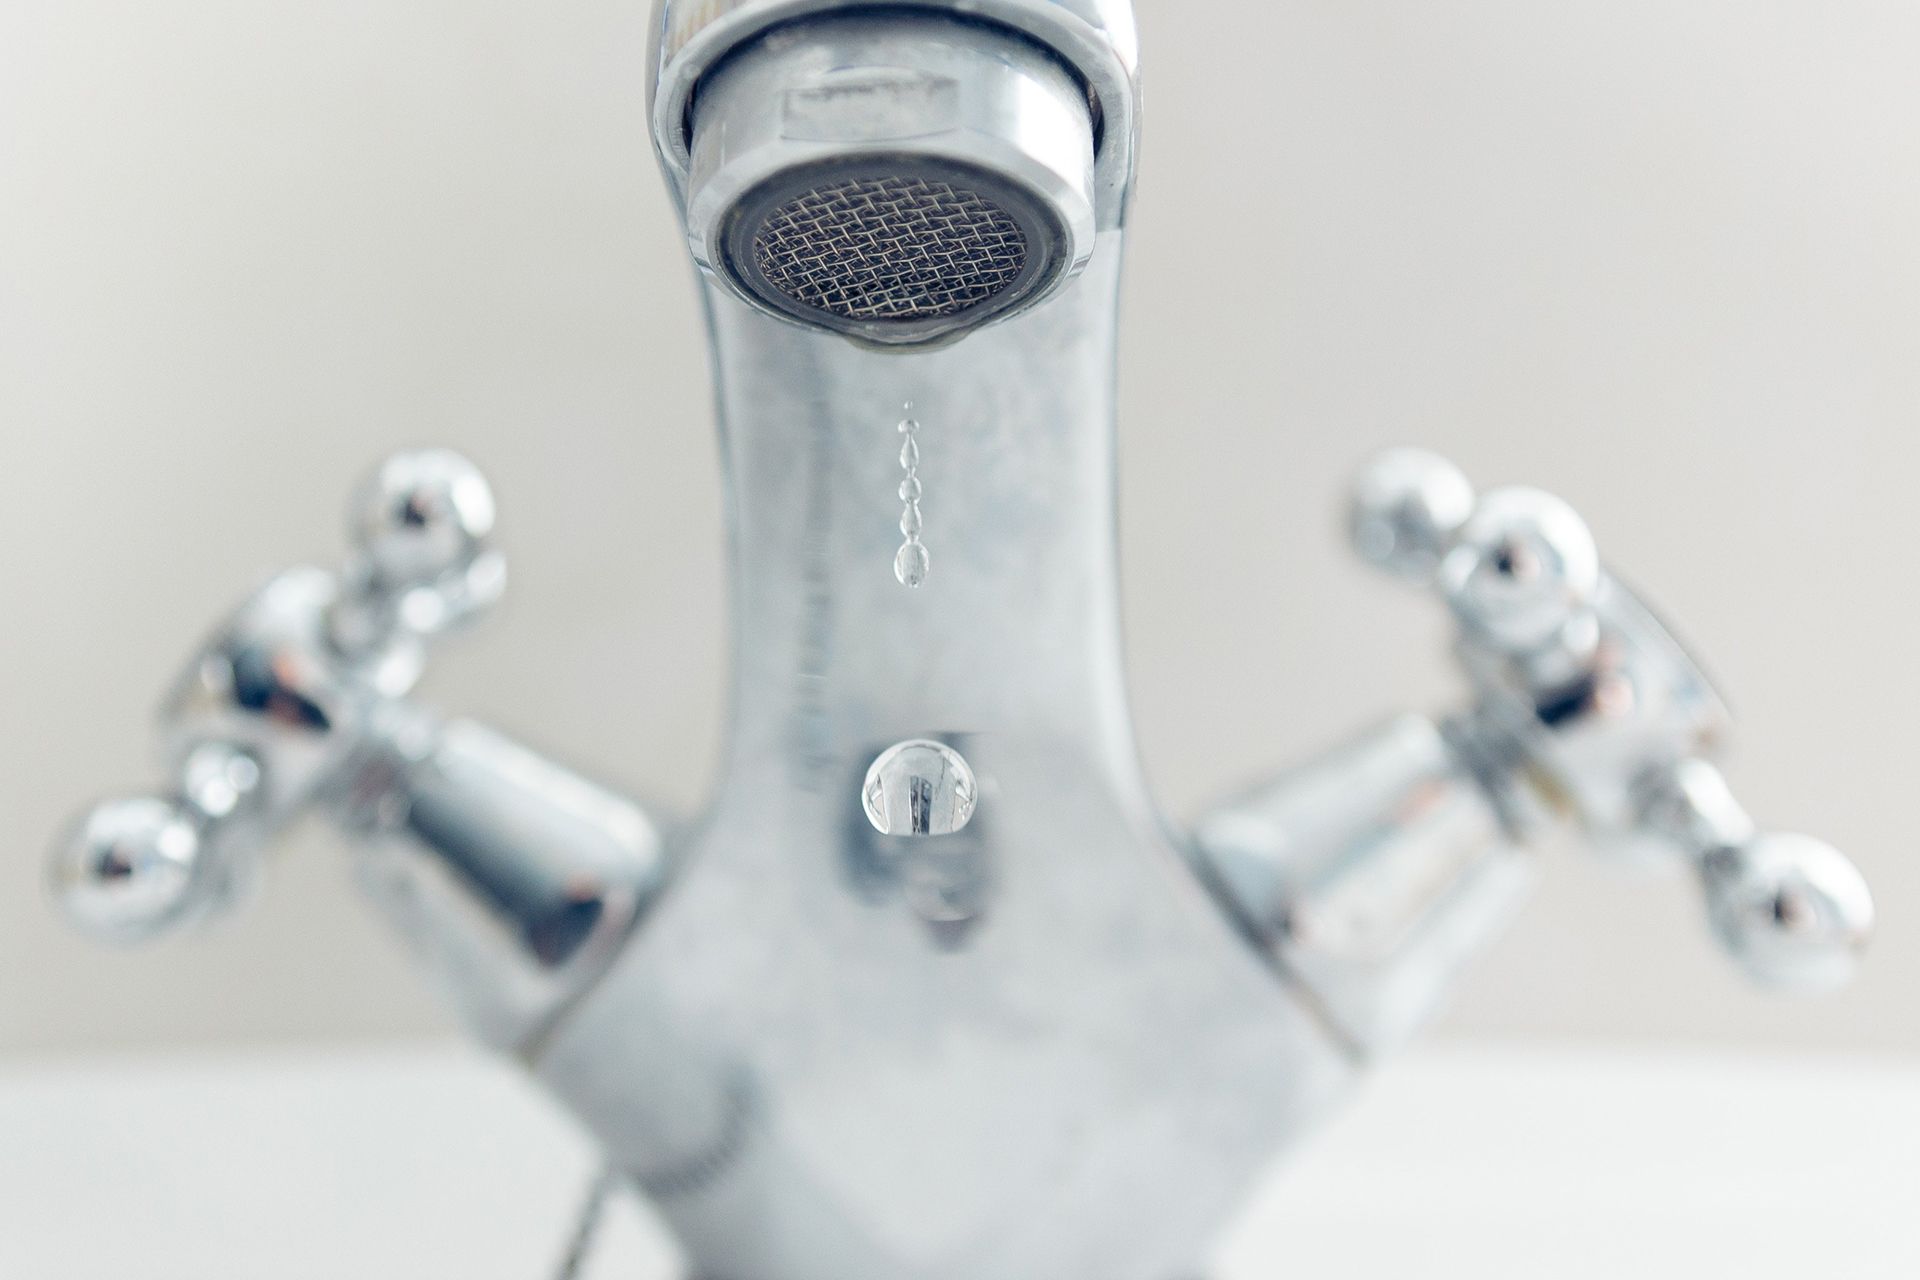 A dripping faucet is a common issue that wastes water and can increase your water bill.